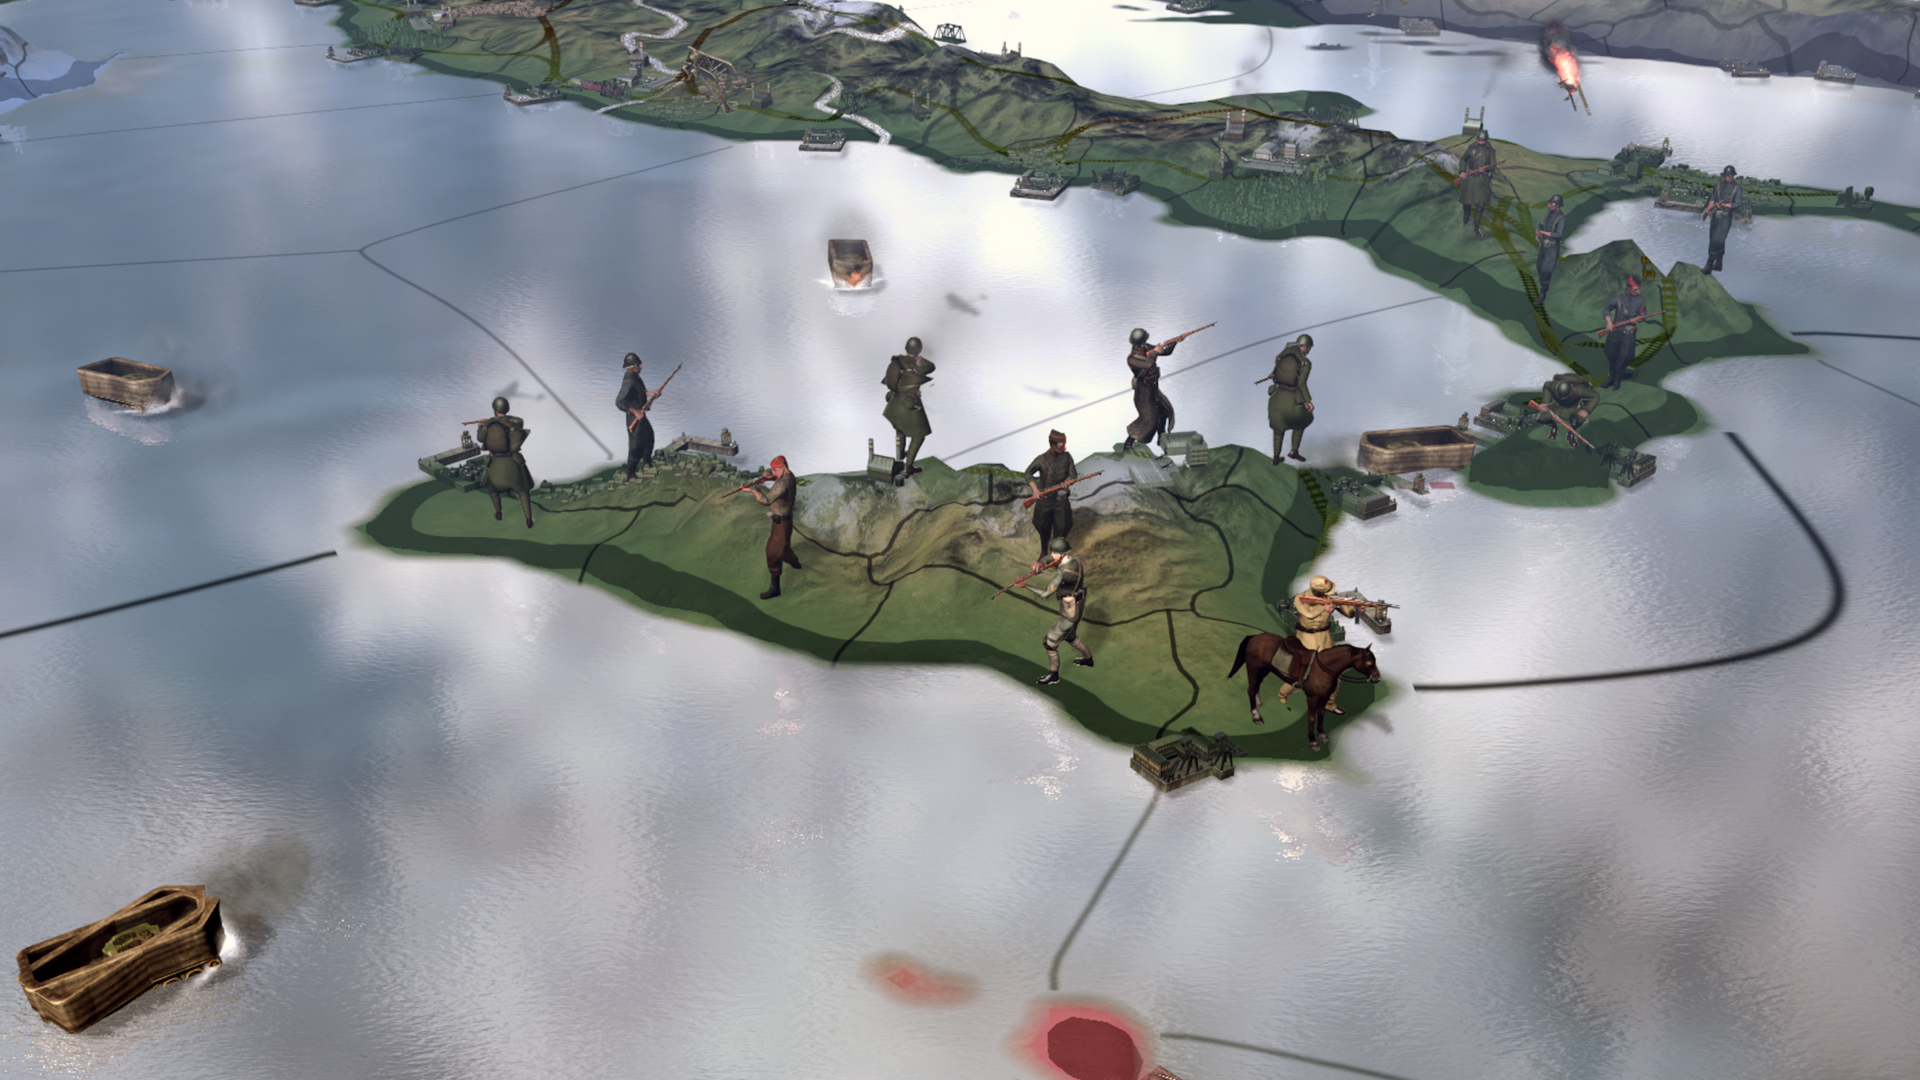 Hearts of Iron 4 By Blood Alone DLC hits the Italian front